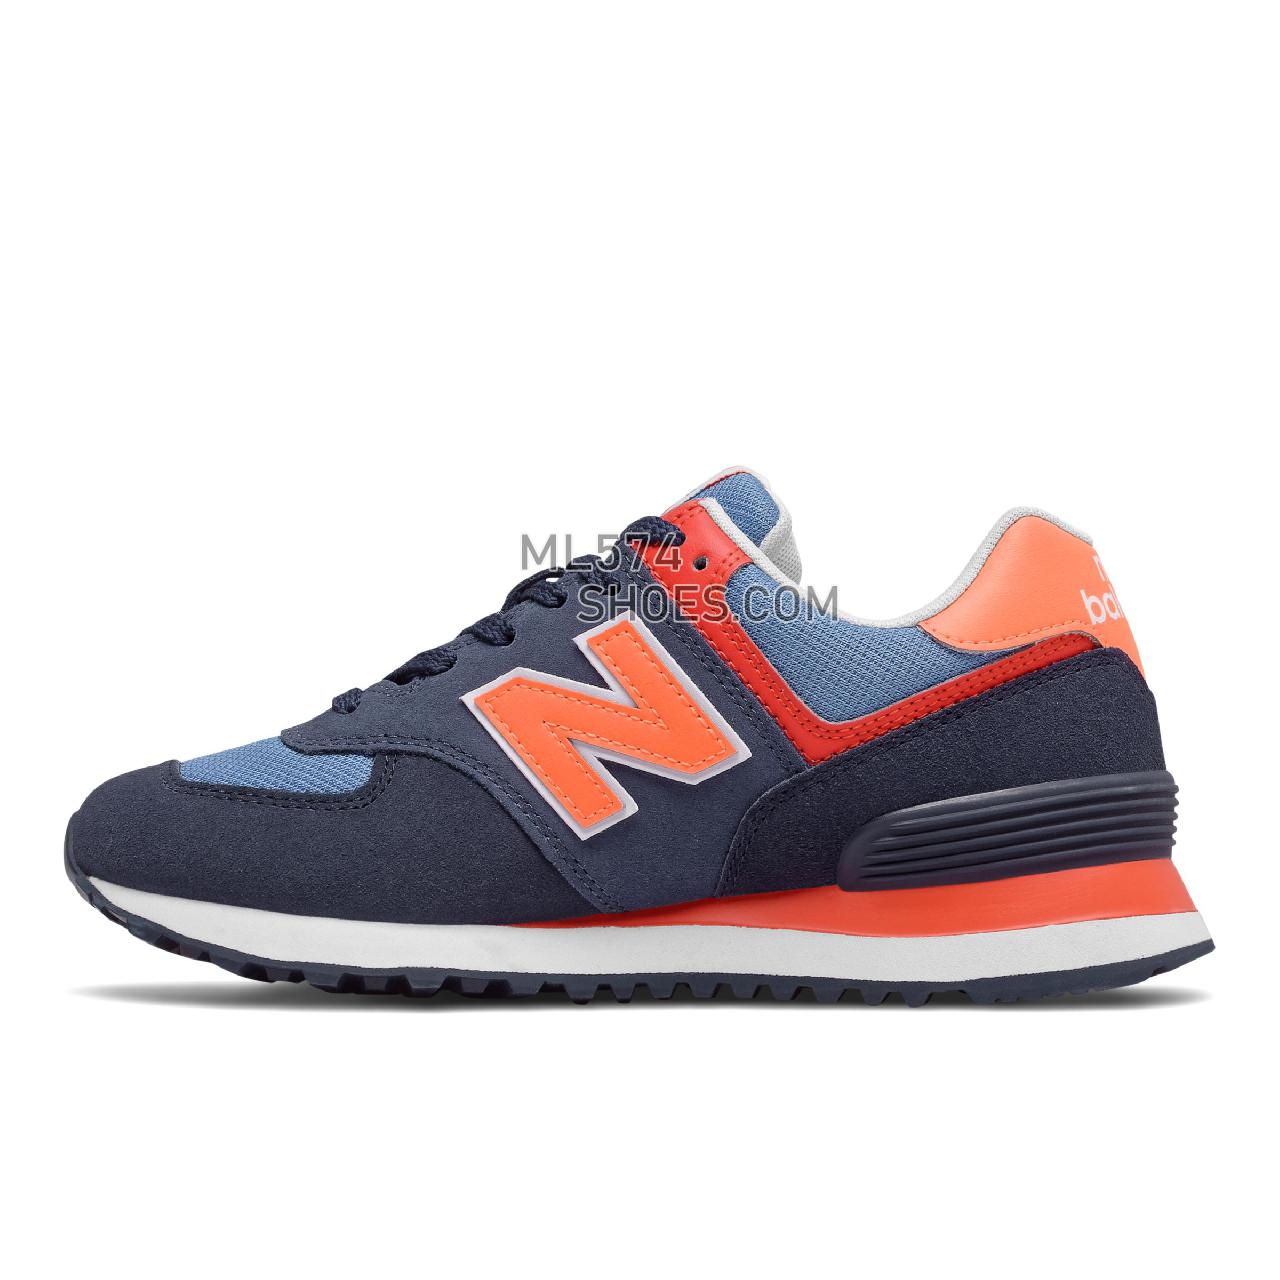 New Balance 574 - Women's Classic Sneakers - Eclipse with Citrus Punch - WL574SY2